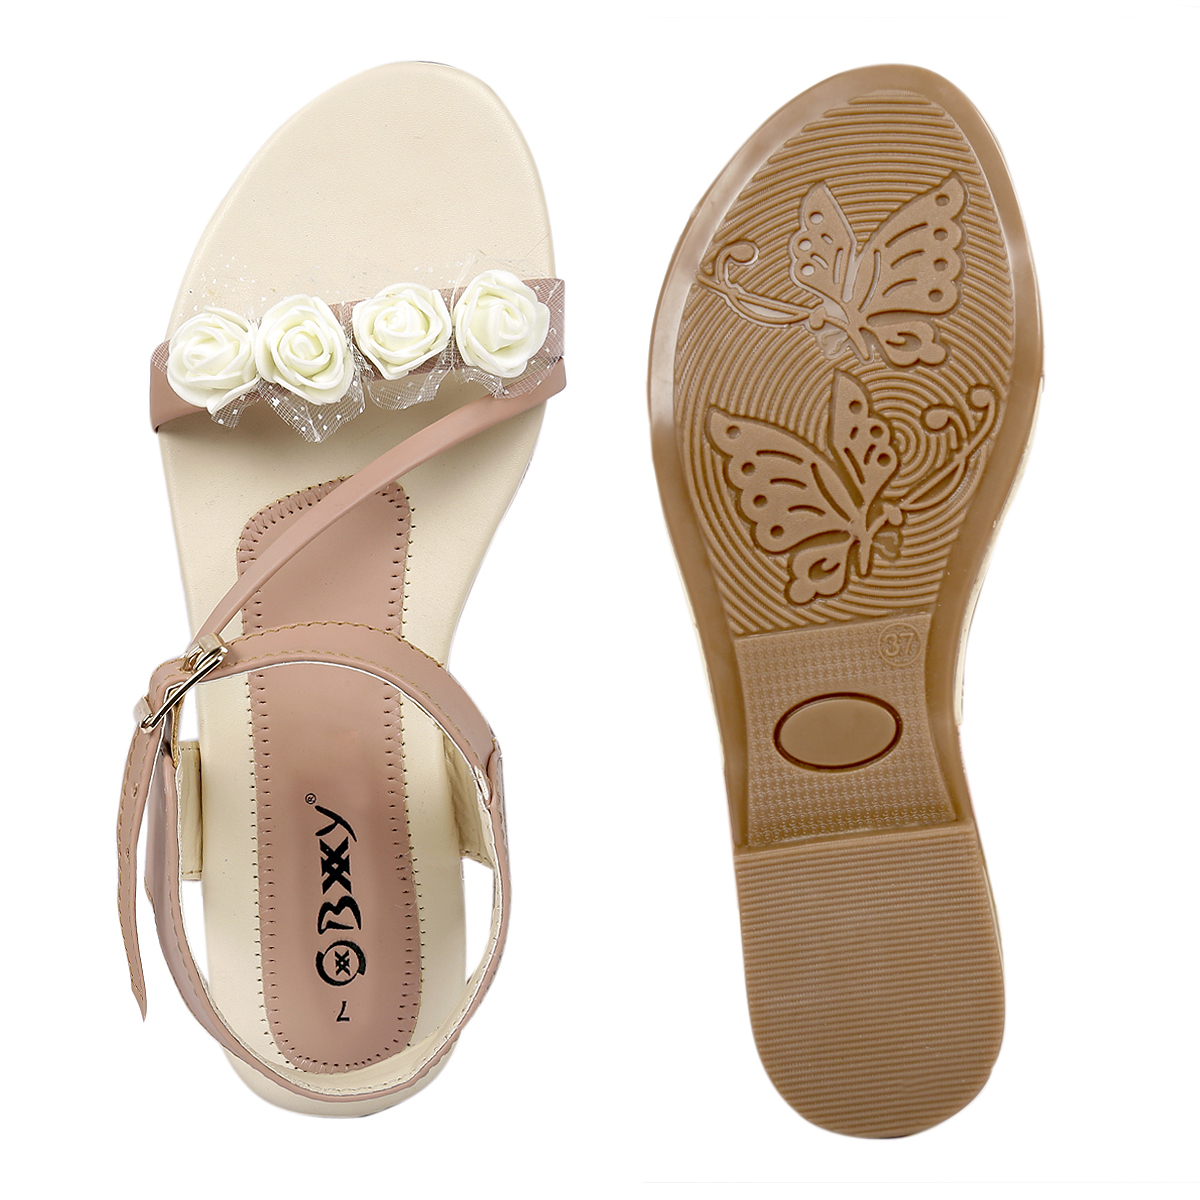 SYNTHETIC MATERIAL FLAT SANDALS WOMEN'S AND GIRLS